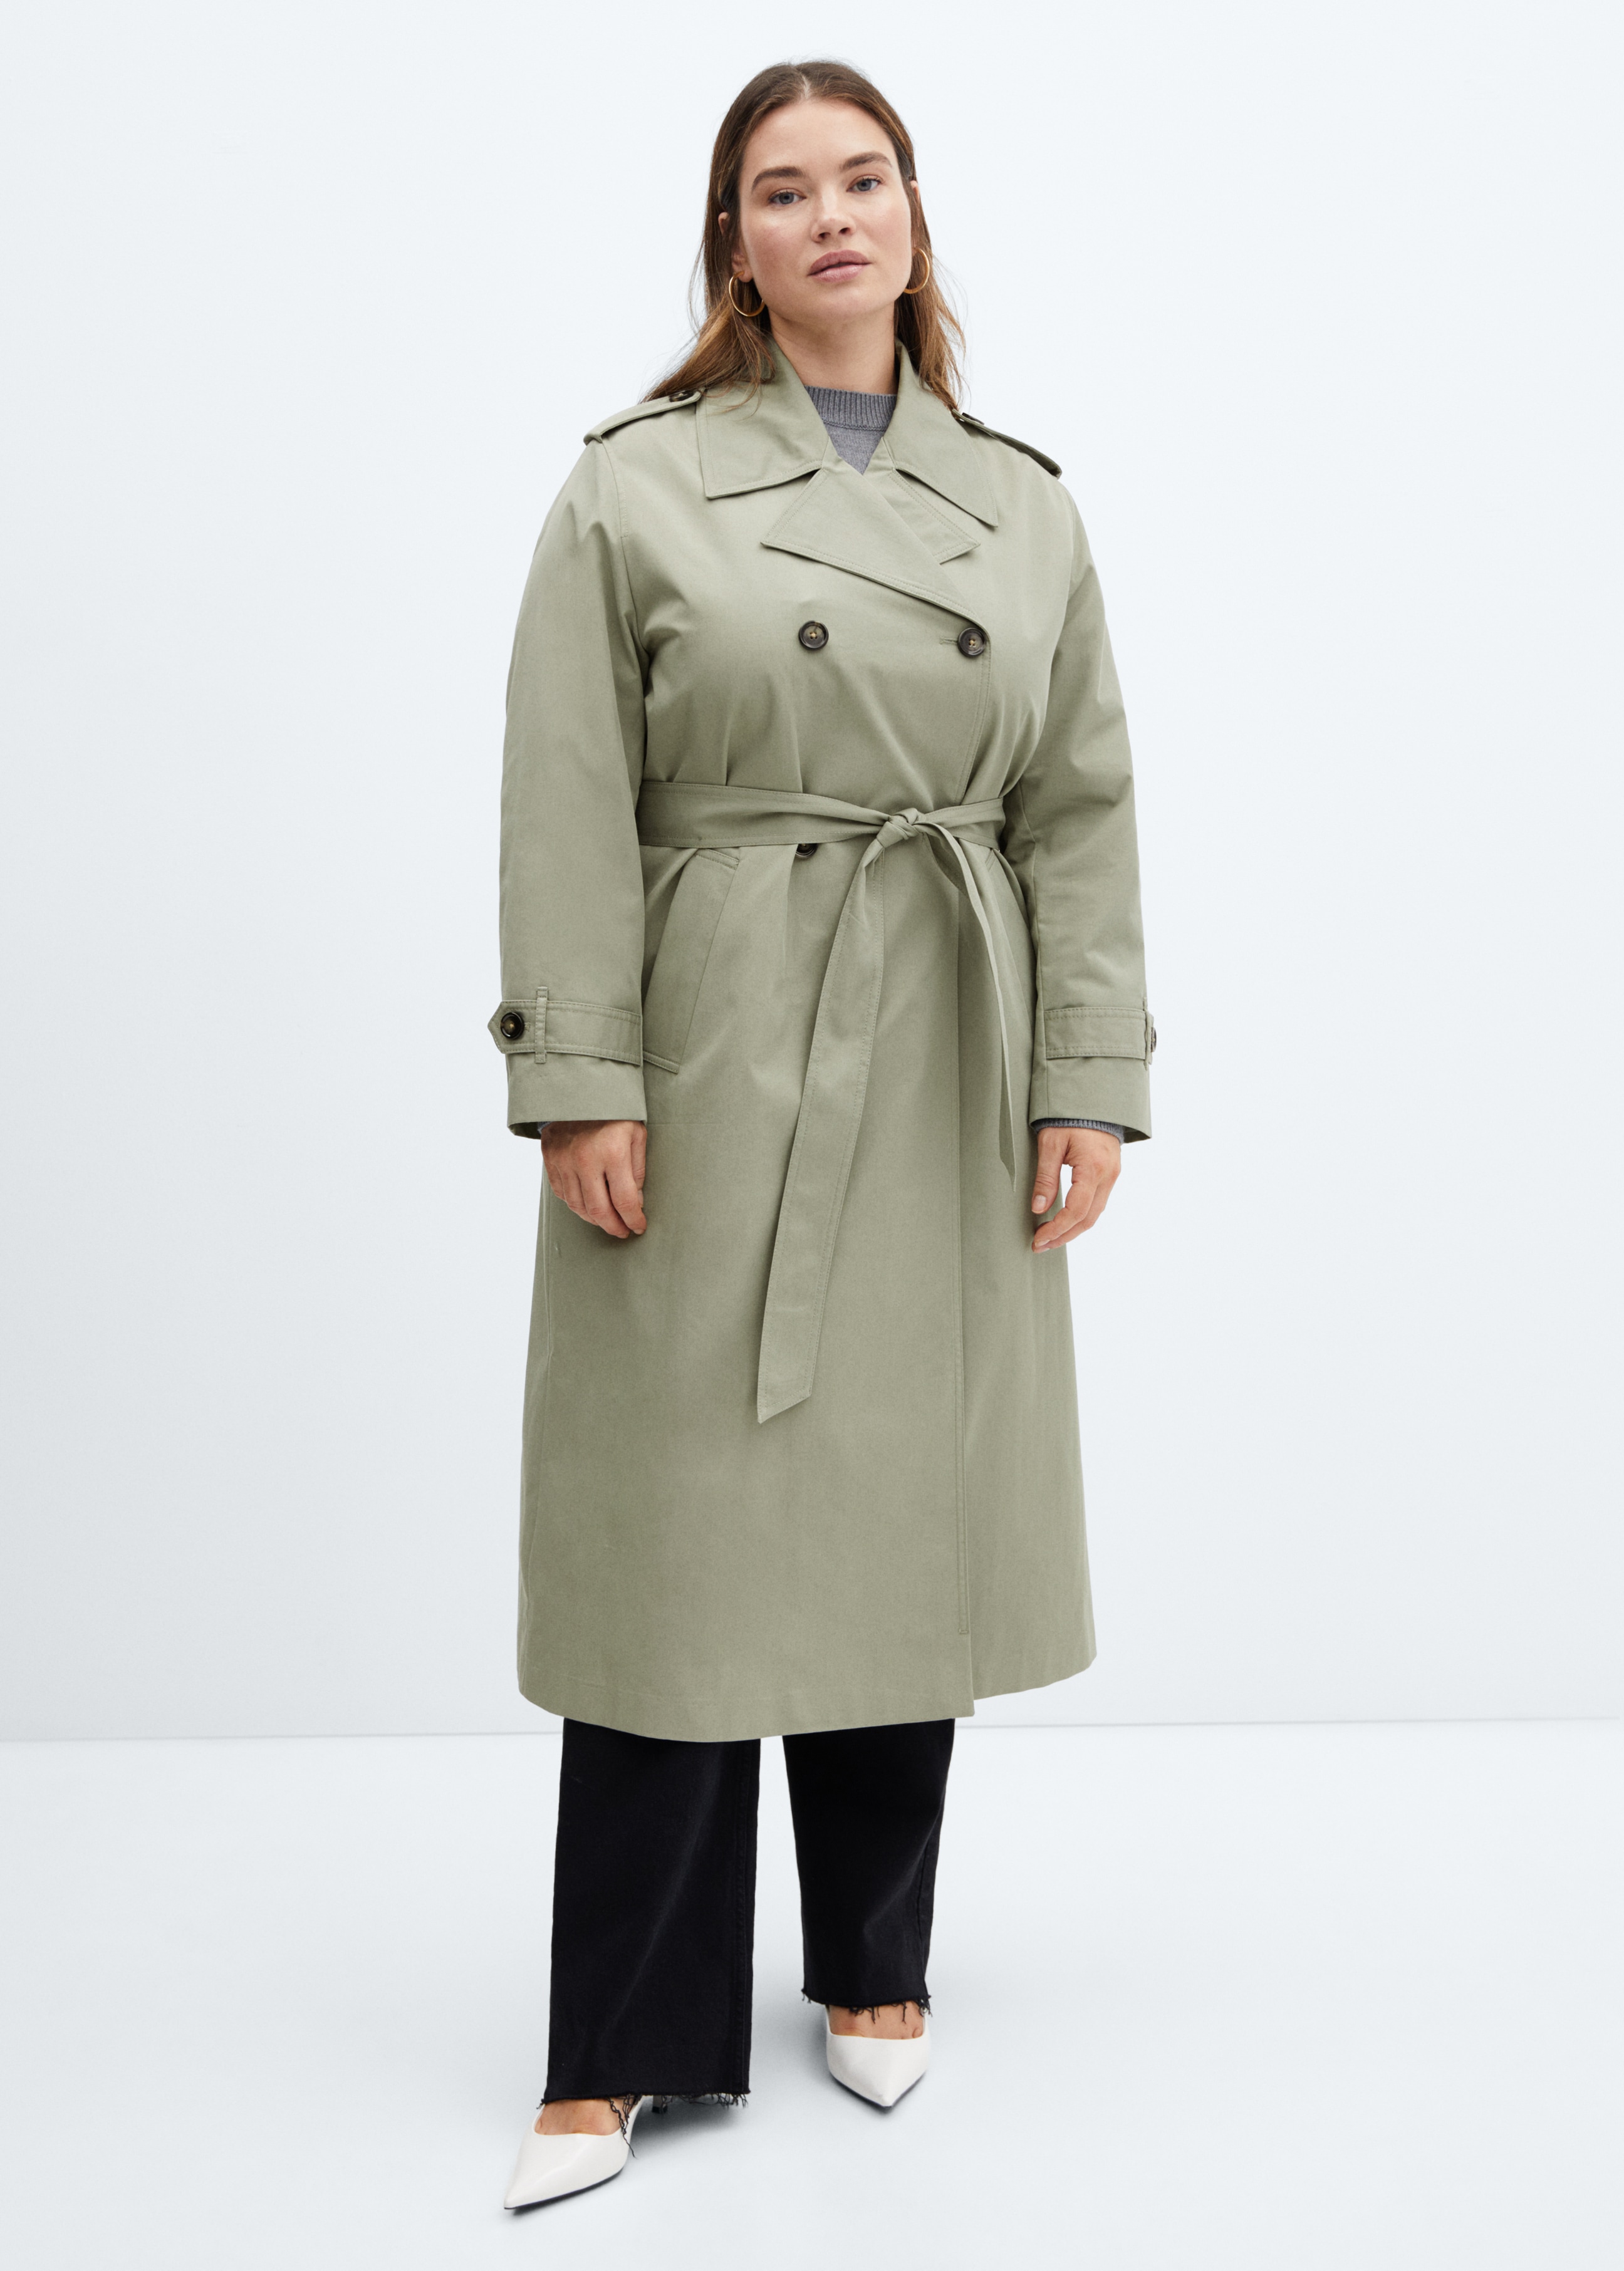 Double-button trench coat